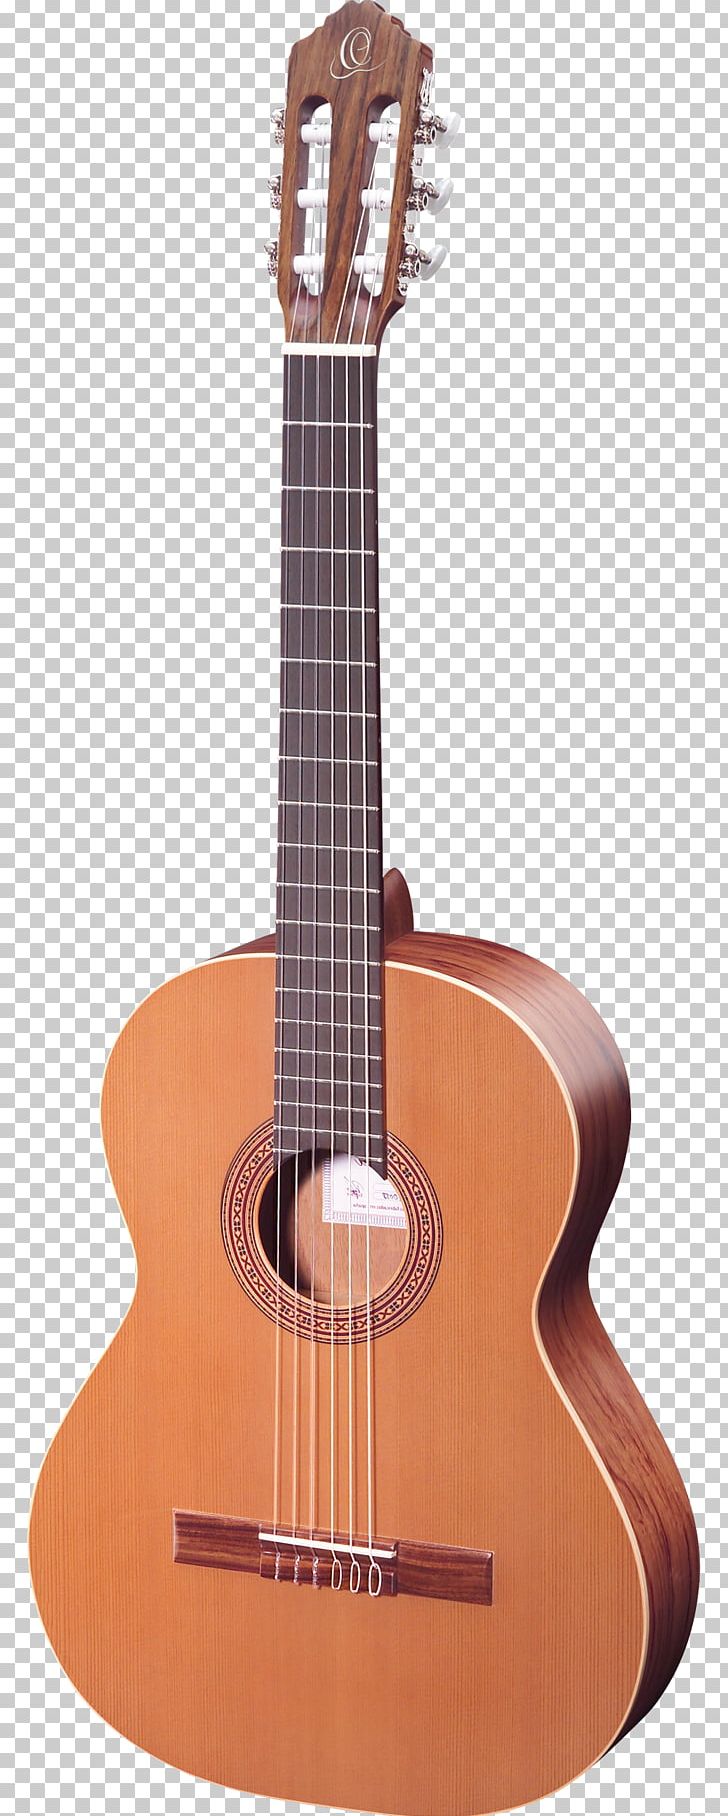 Classical Guitar Musical Instruments Acoustic Guitar Fingerboard PNG, Clipart, Acoustic Electric Guitar, Classical Guitar, Cuatro, Guitar Accessory, Musical Instruments Free PNG Download